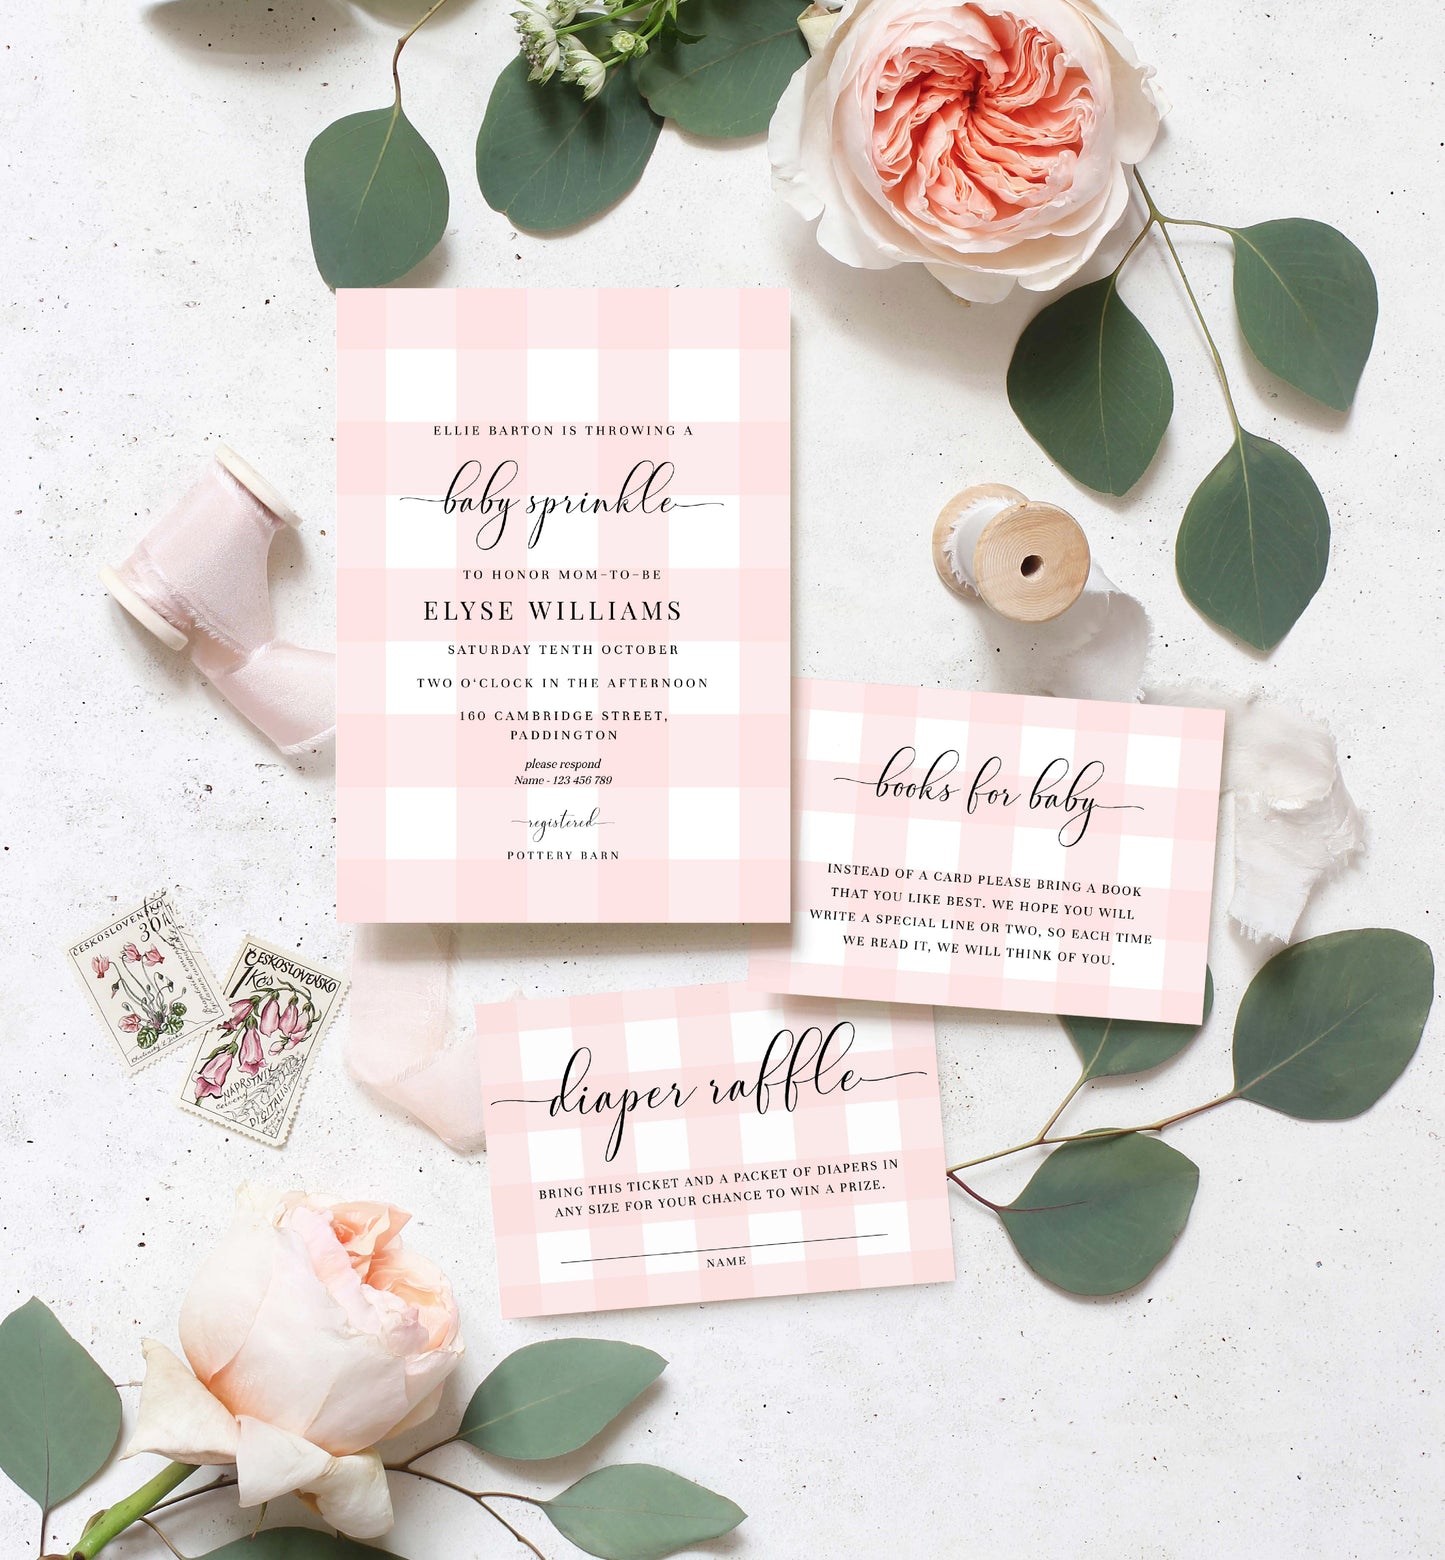 Pink Gingham Baby Sprinkle Invitation, Books For Baby, Diaper Raffle Ticket, Printable Girl Baby Shower Invite, Plaid Check Baby Shower